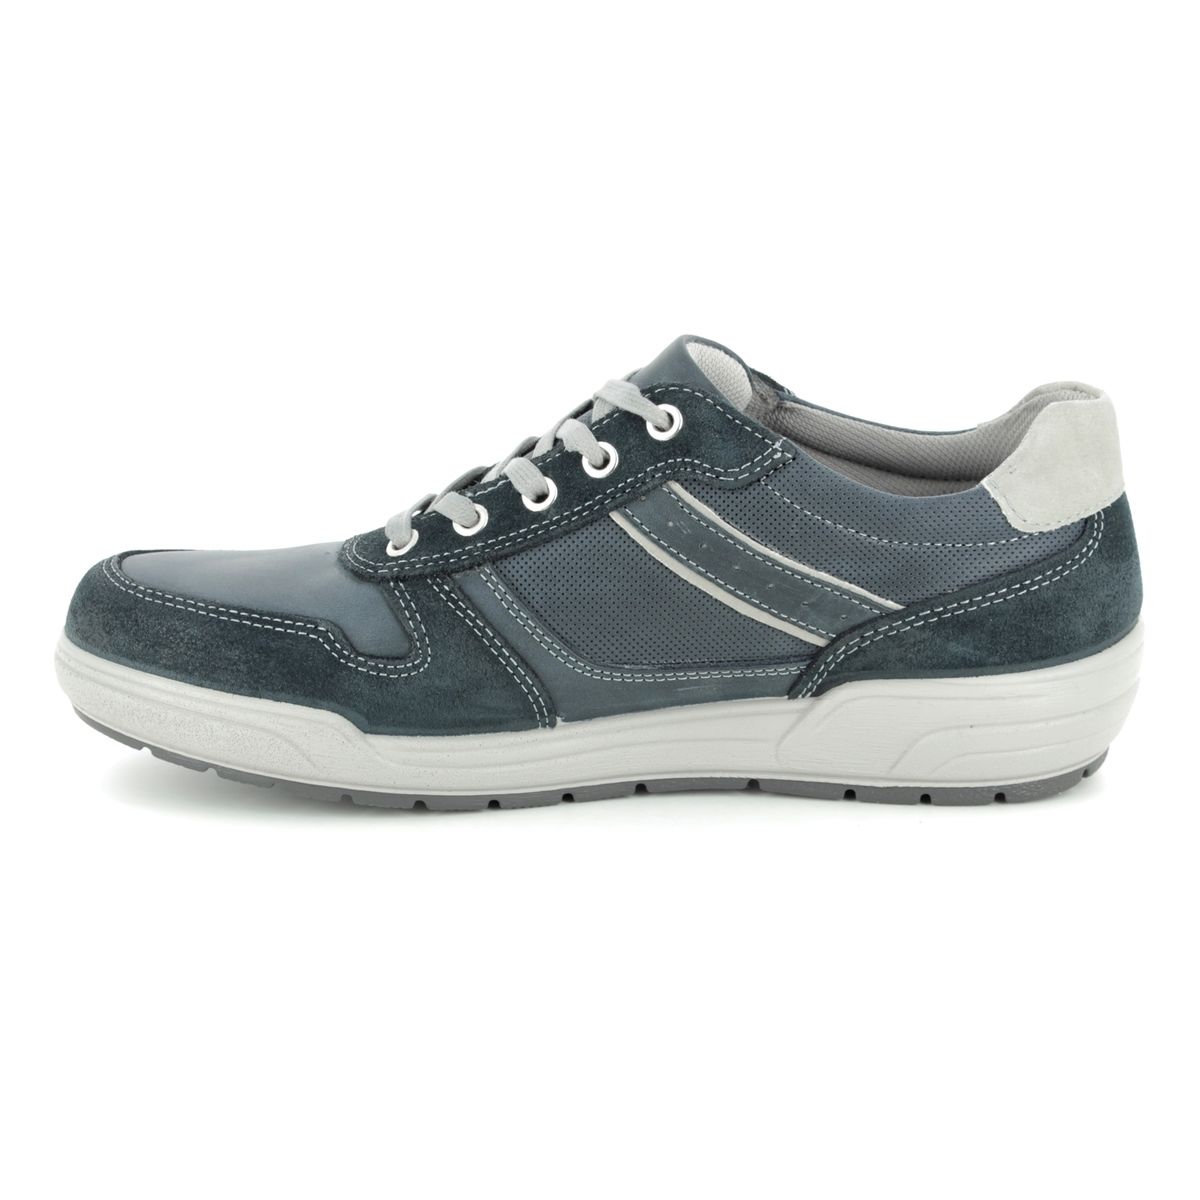 IMAC Daxel 2560-2409018 Navy leather comfort shoes